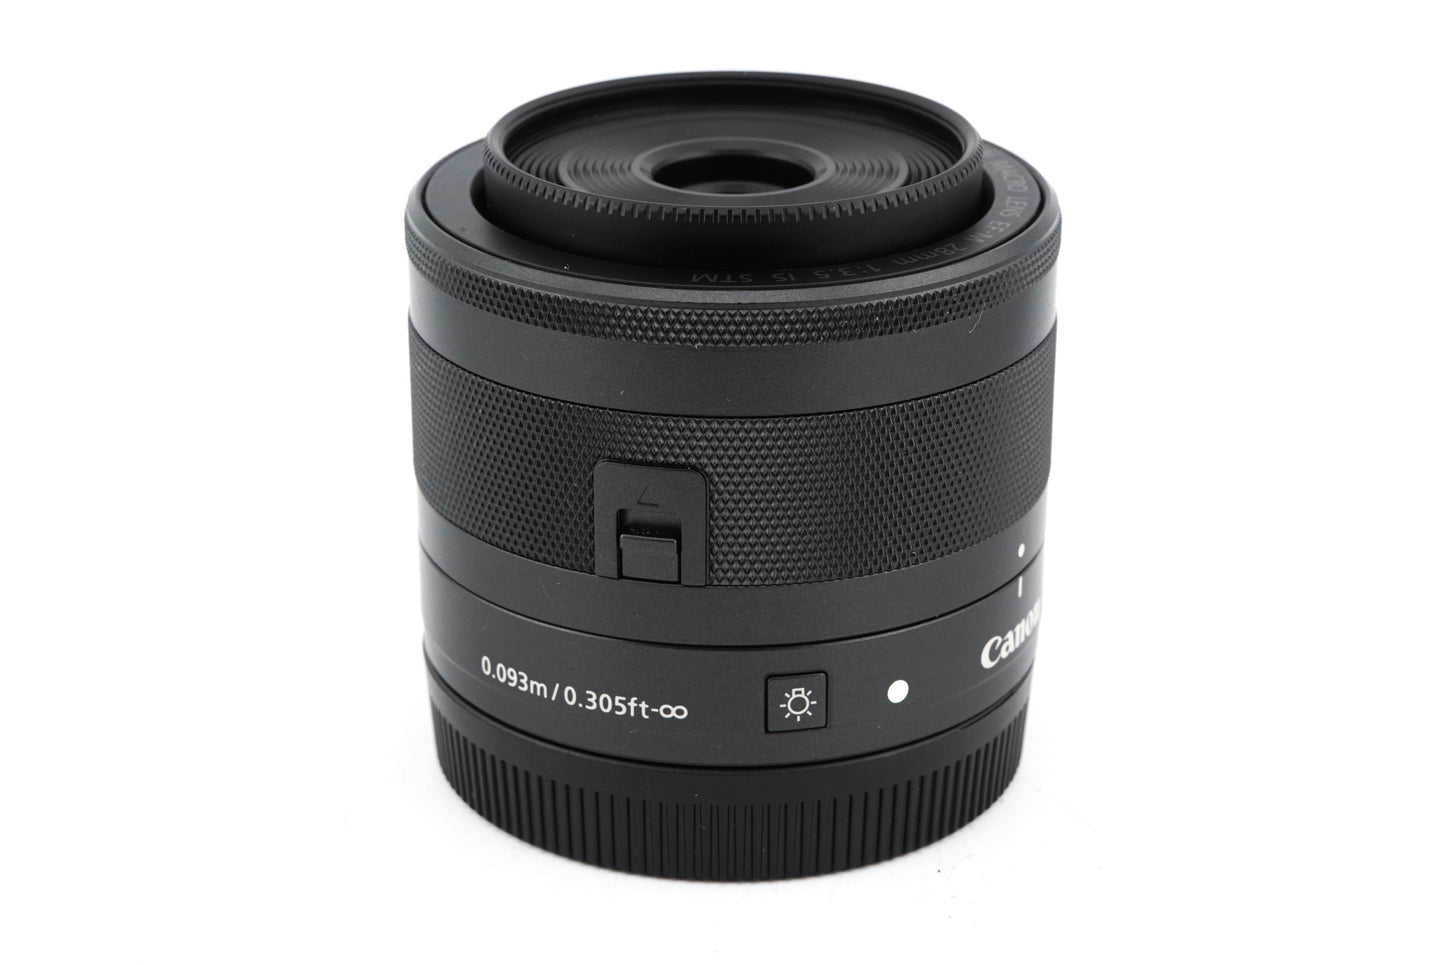 Canon 28mm f3.5 Macro IS STM